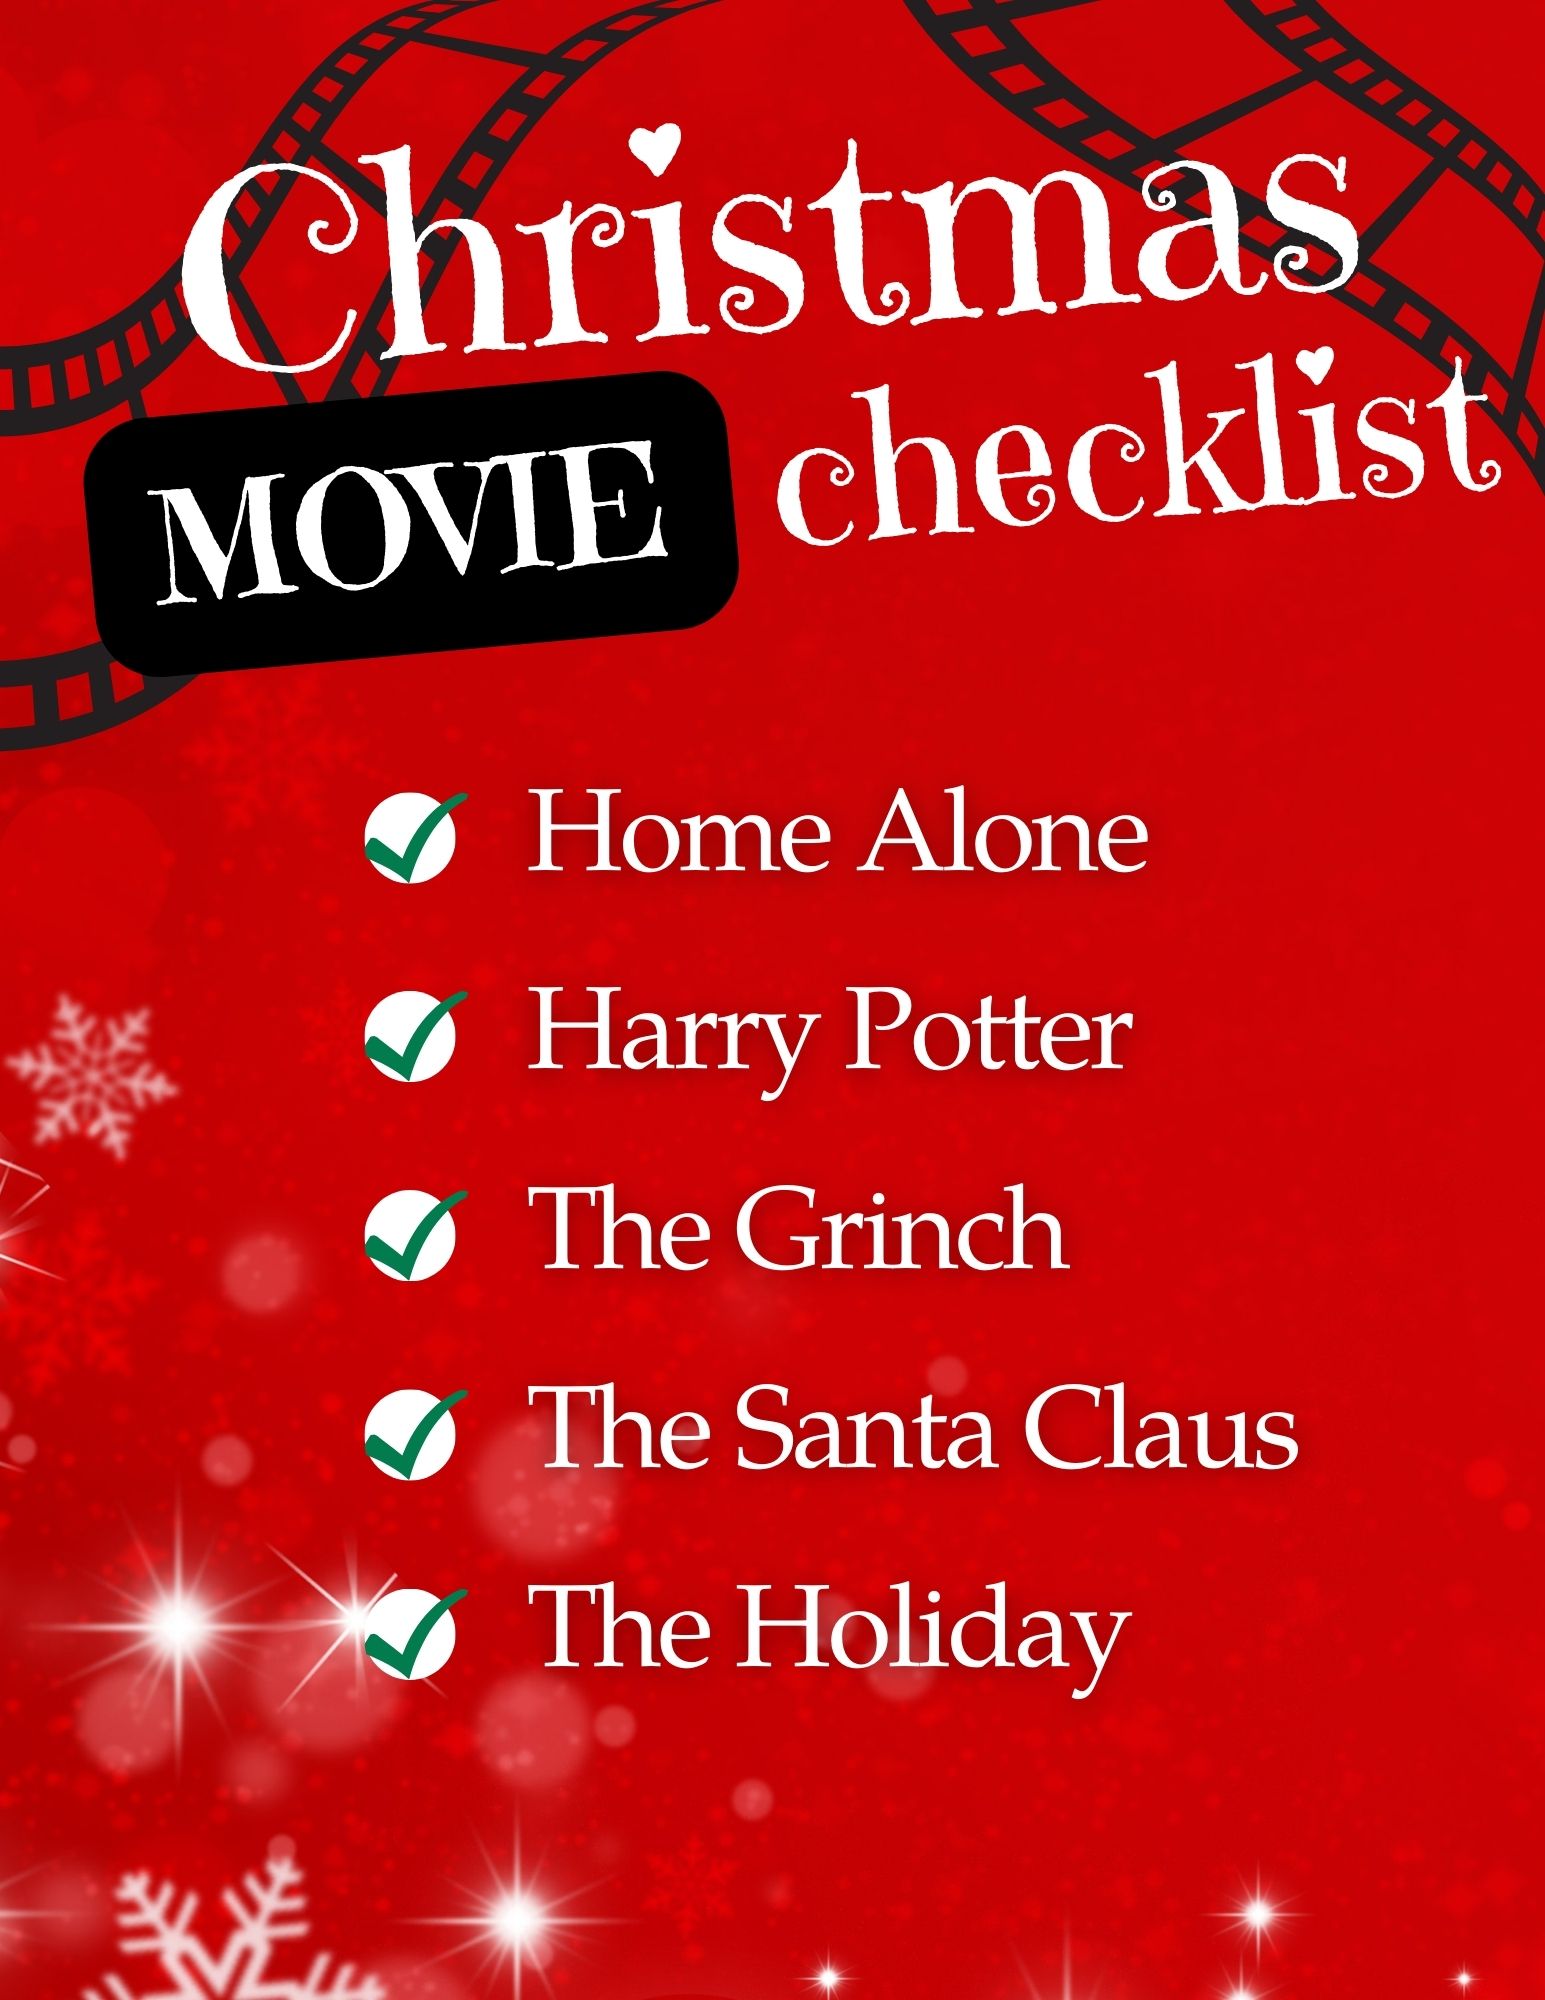 infographic with a must-watch Christmas movie list